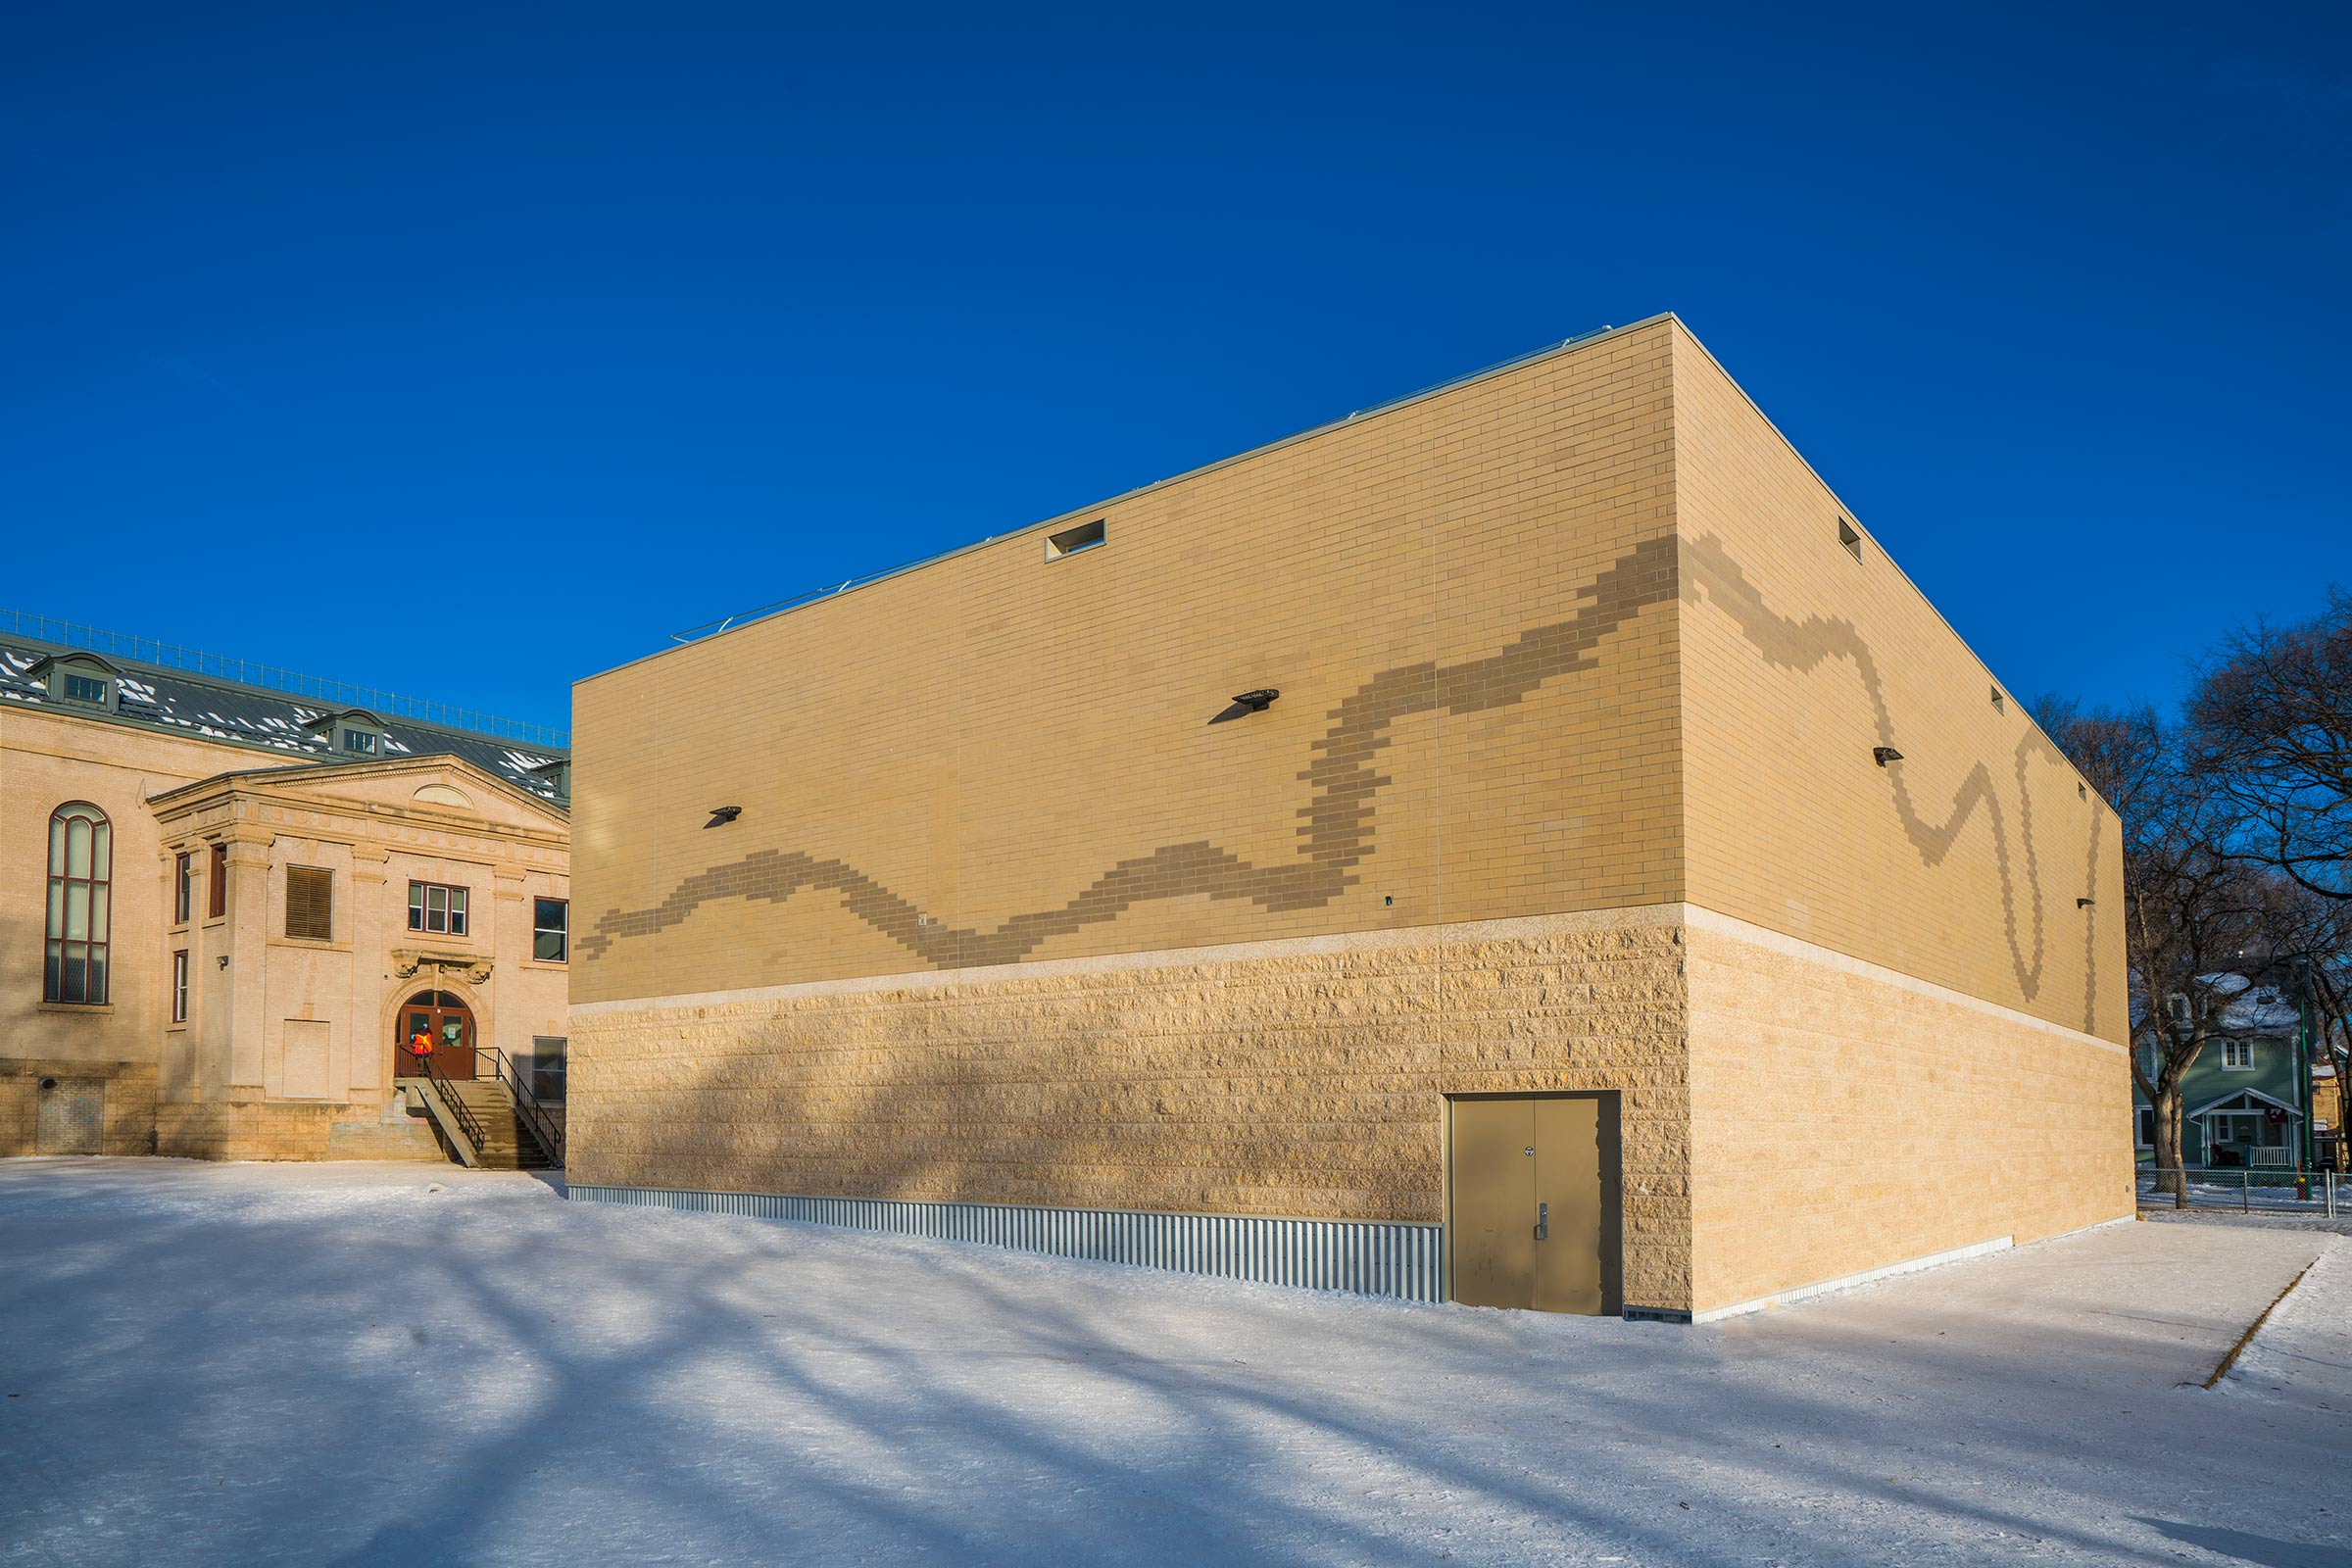 Laura Secord School Gymnasium Addition from the back depicting the local landscape on the building.